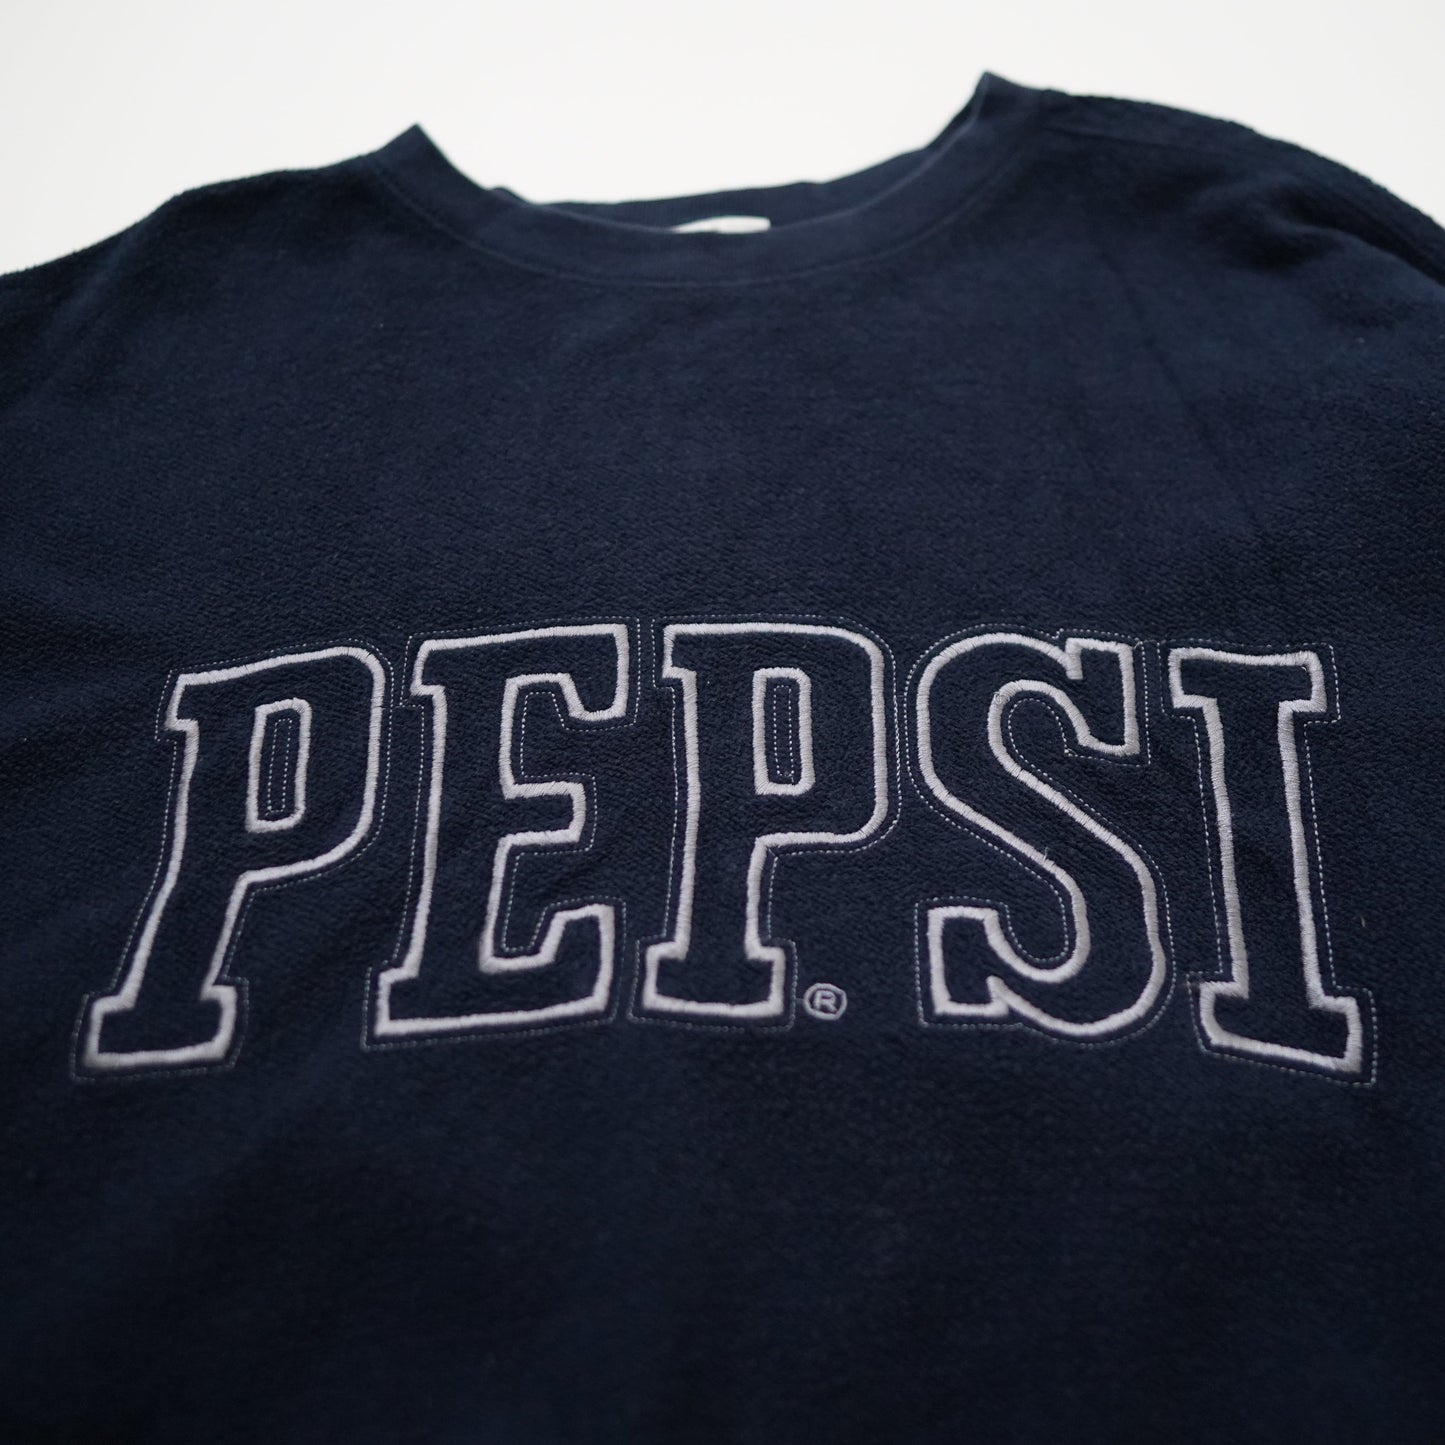 90s NOTHING ELSE IS A PEPUSI sweat